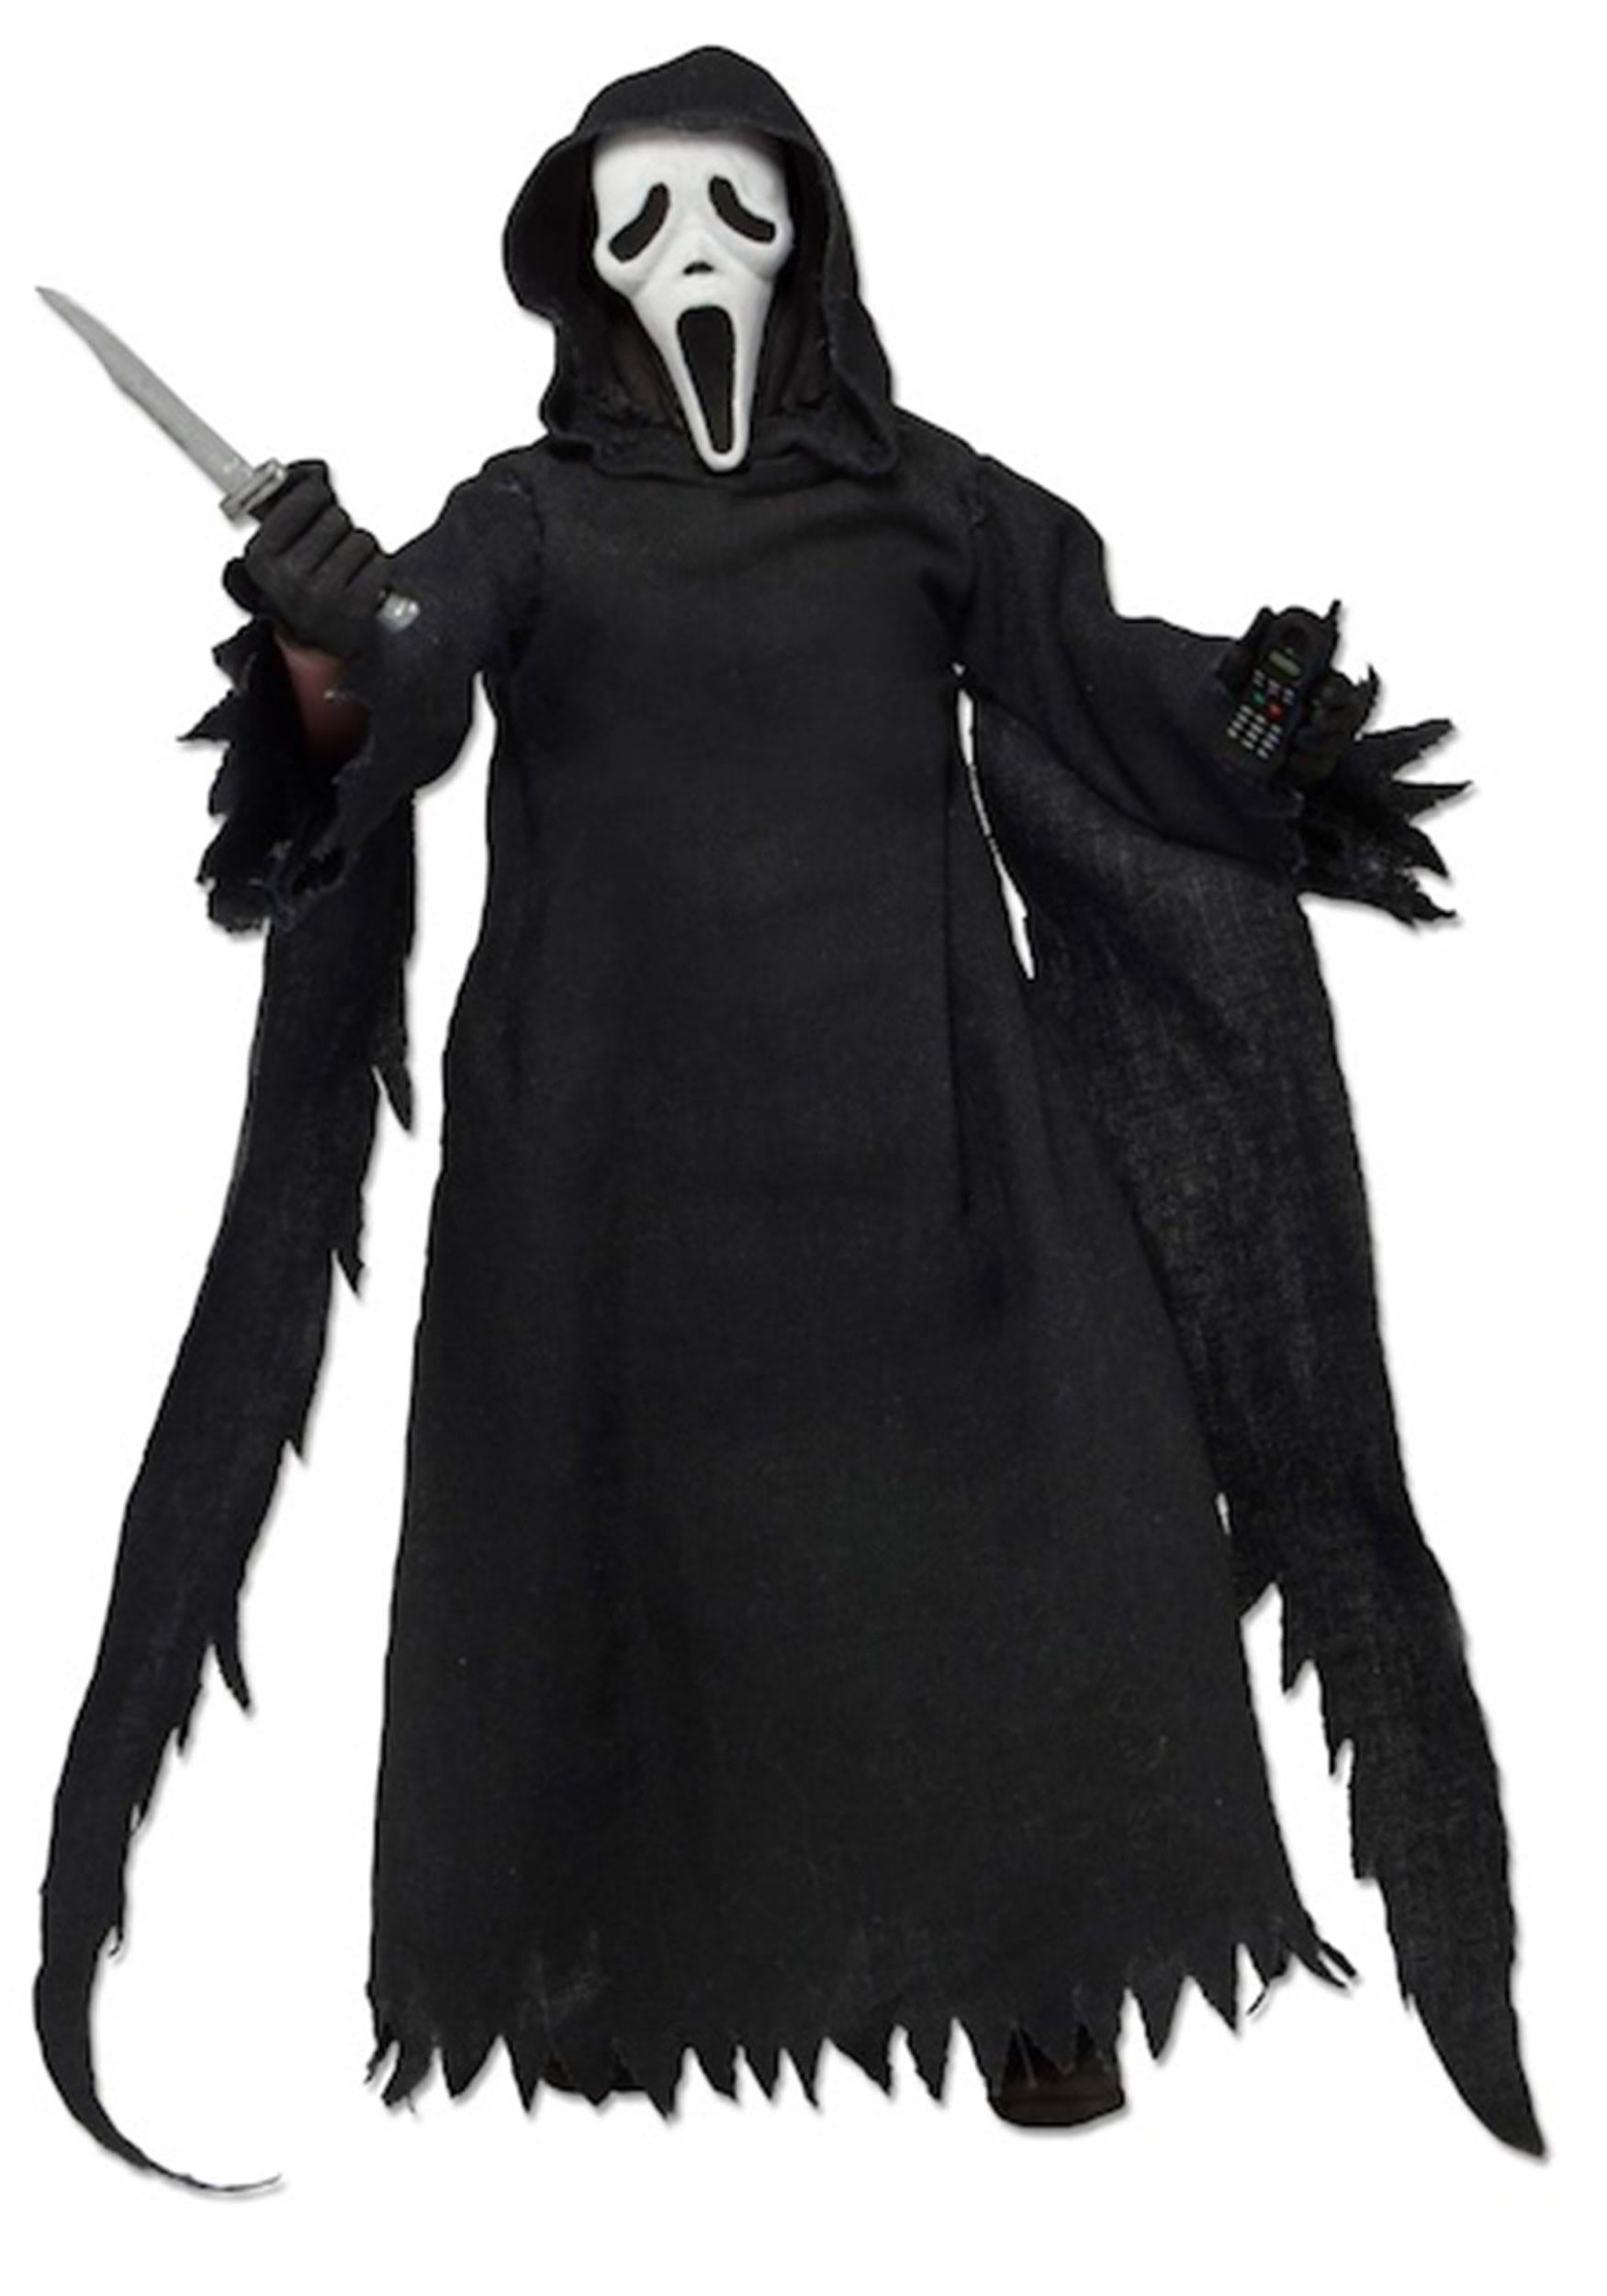 8" Clothed Scream Ghost Face Action Figure